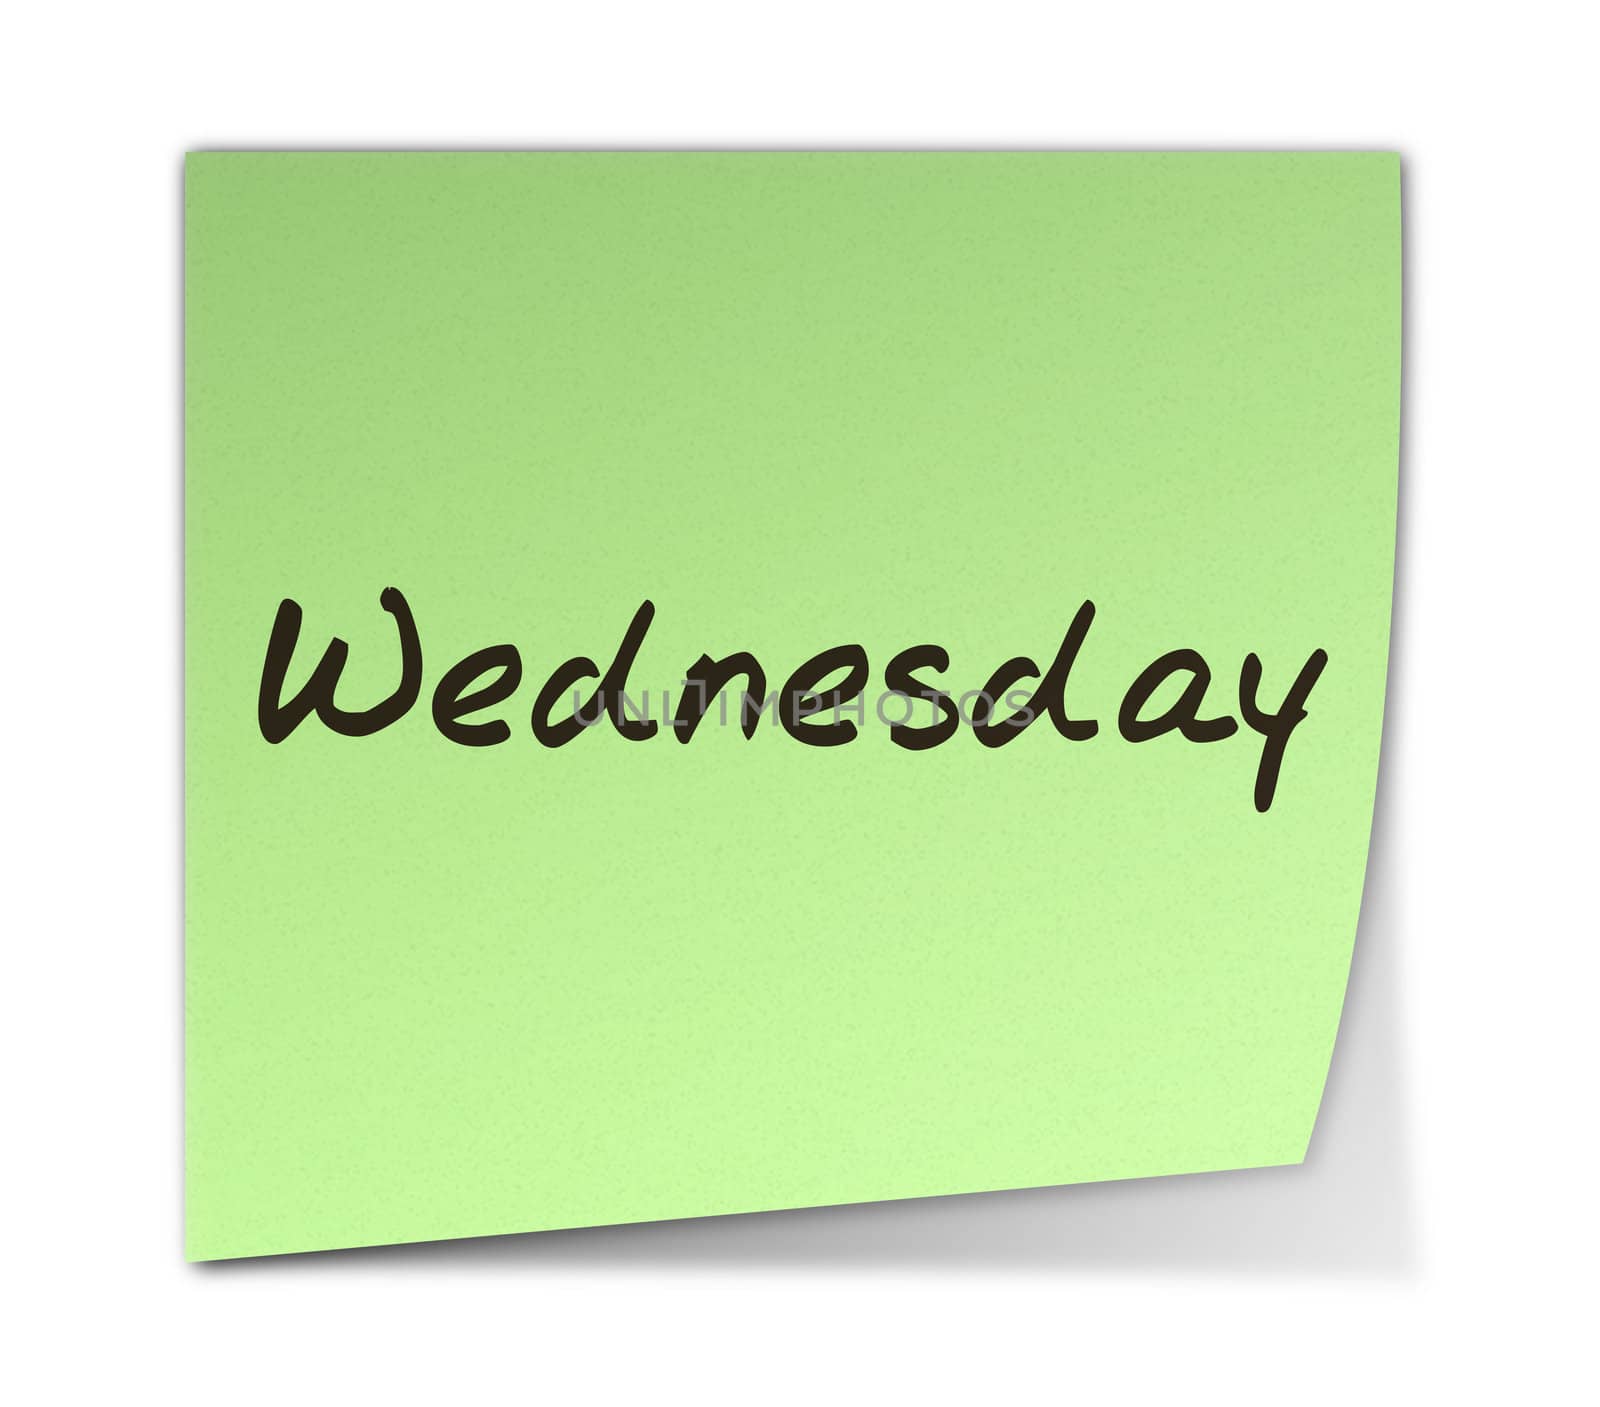 Color Post-it Notes With Handwritten Wednesday Weekday